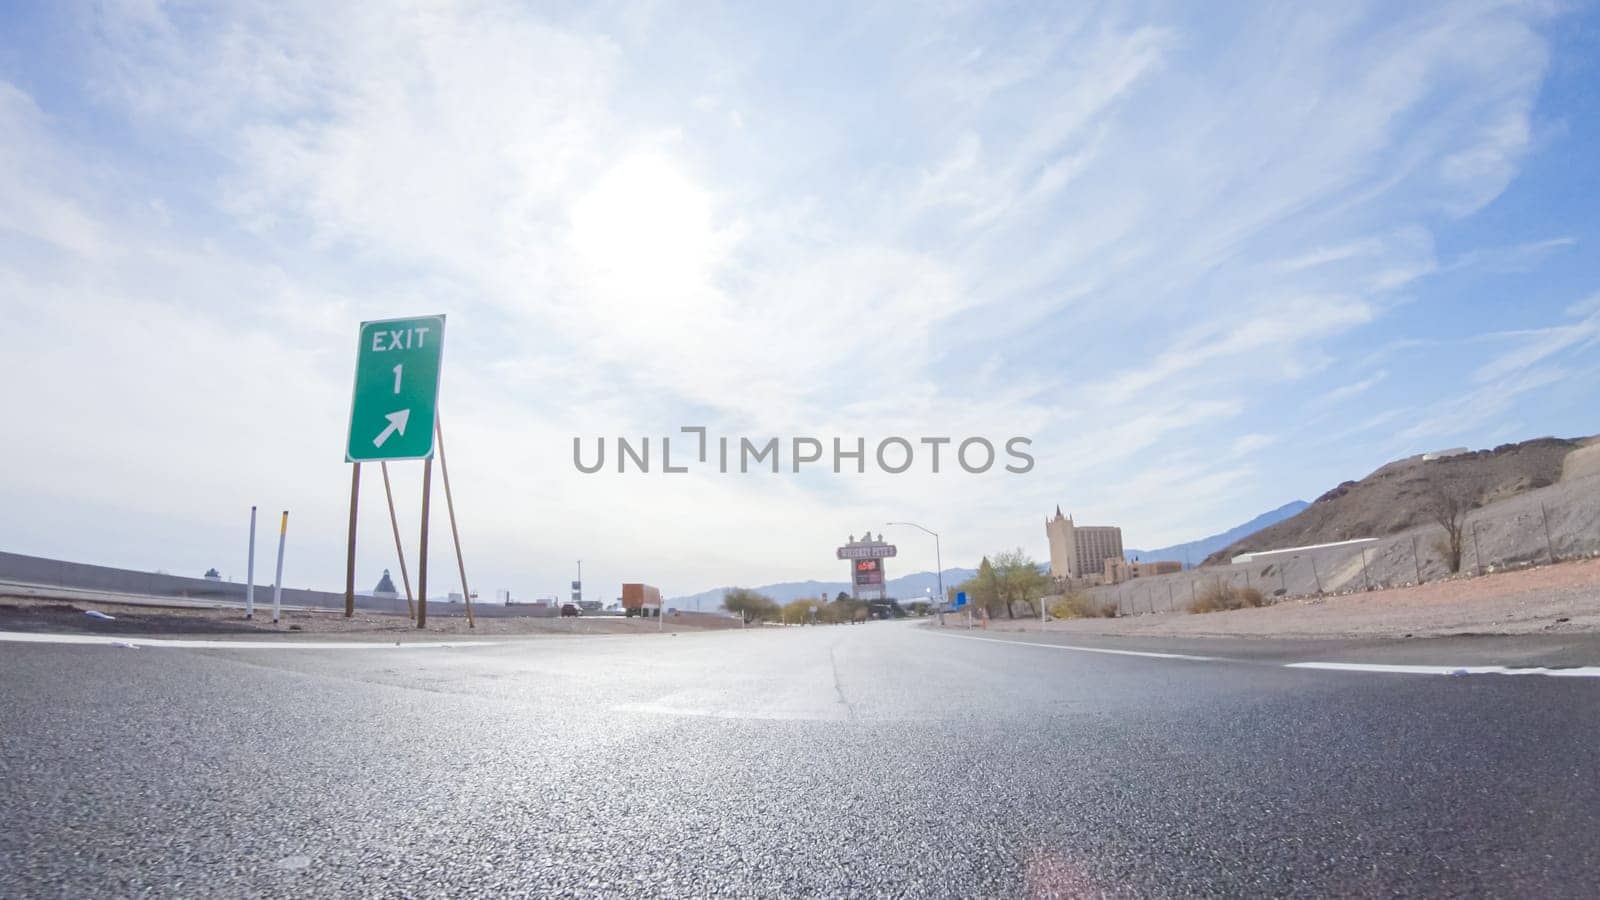 Daytime Drive: Primm Streets near Vibrant Casinos by arinahabich